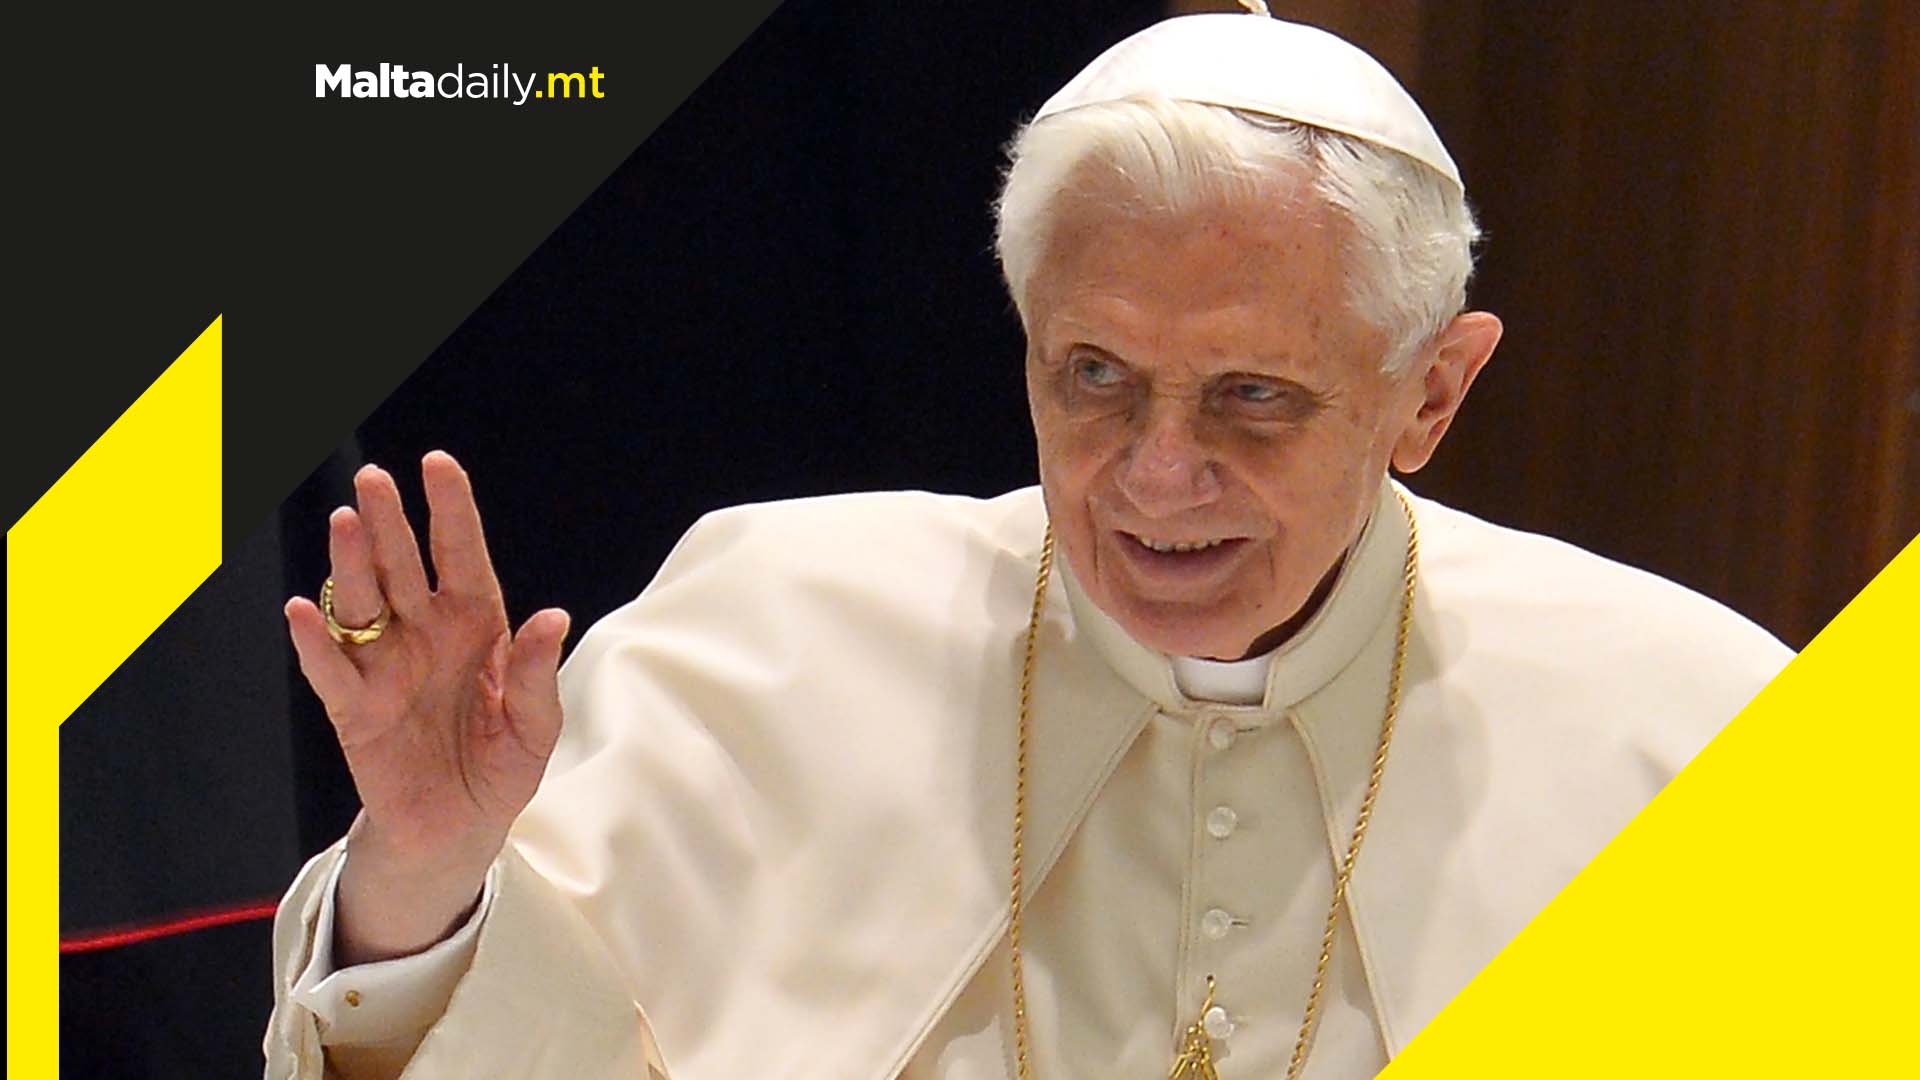 Former Pope Benedict XVI accused of failing to act on child sexual abuse cases